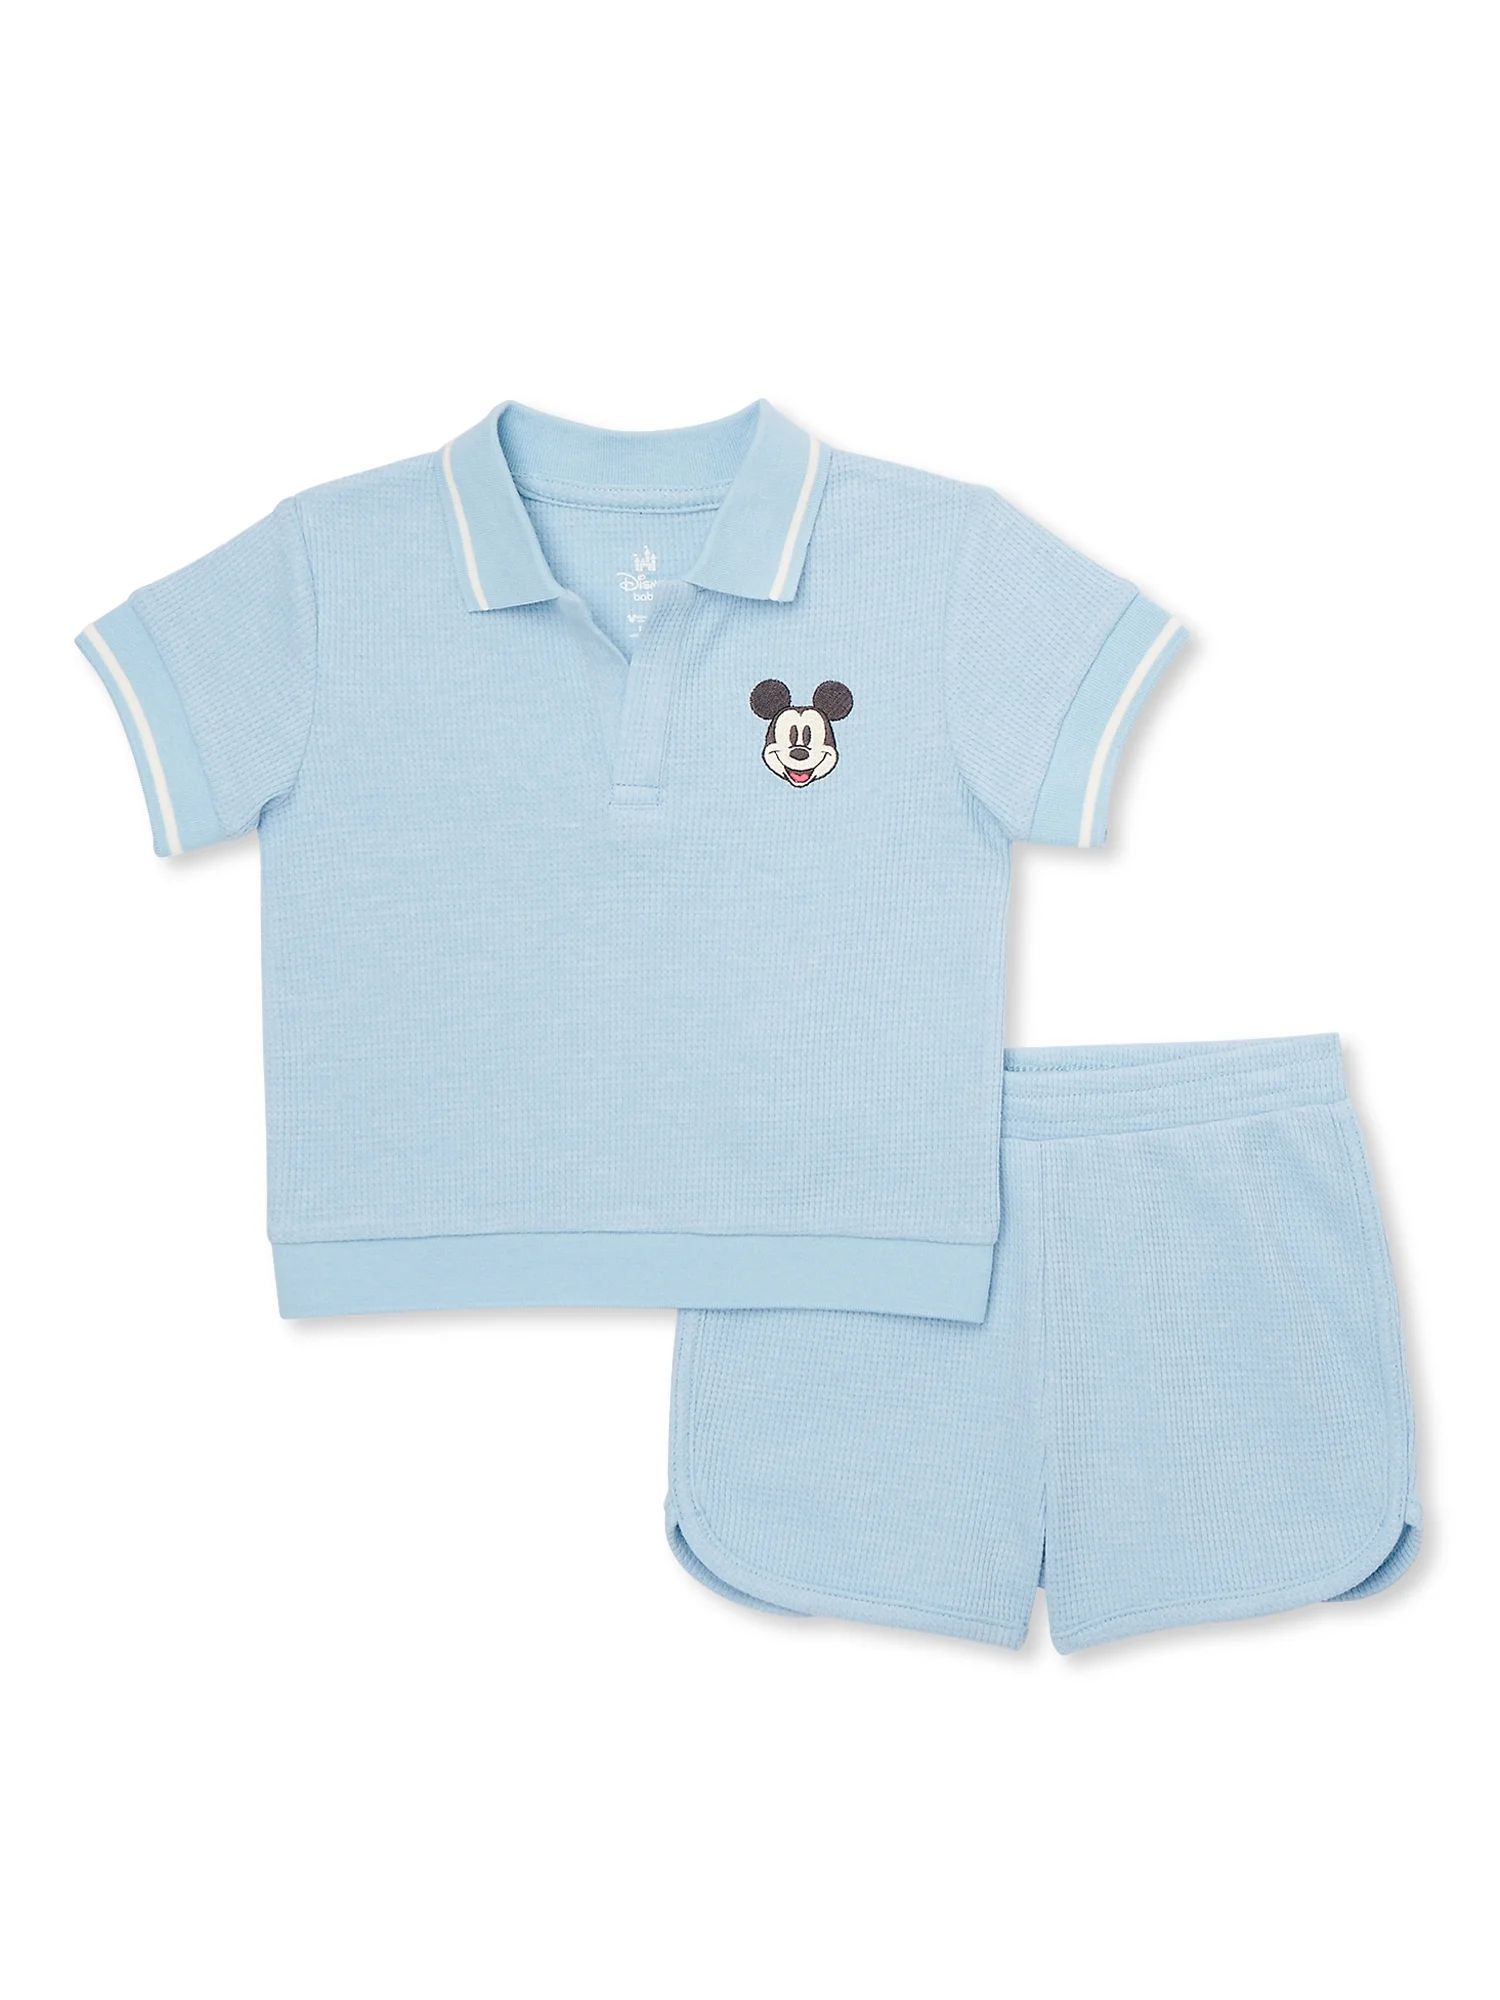 Mickey Mouse Baby Polo Shirt and Shorts Set, 2-Piece, Sizes 0M-18M | Walmart (US)